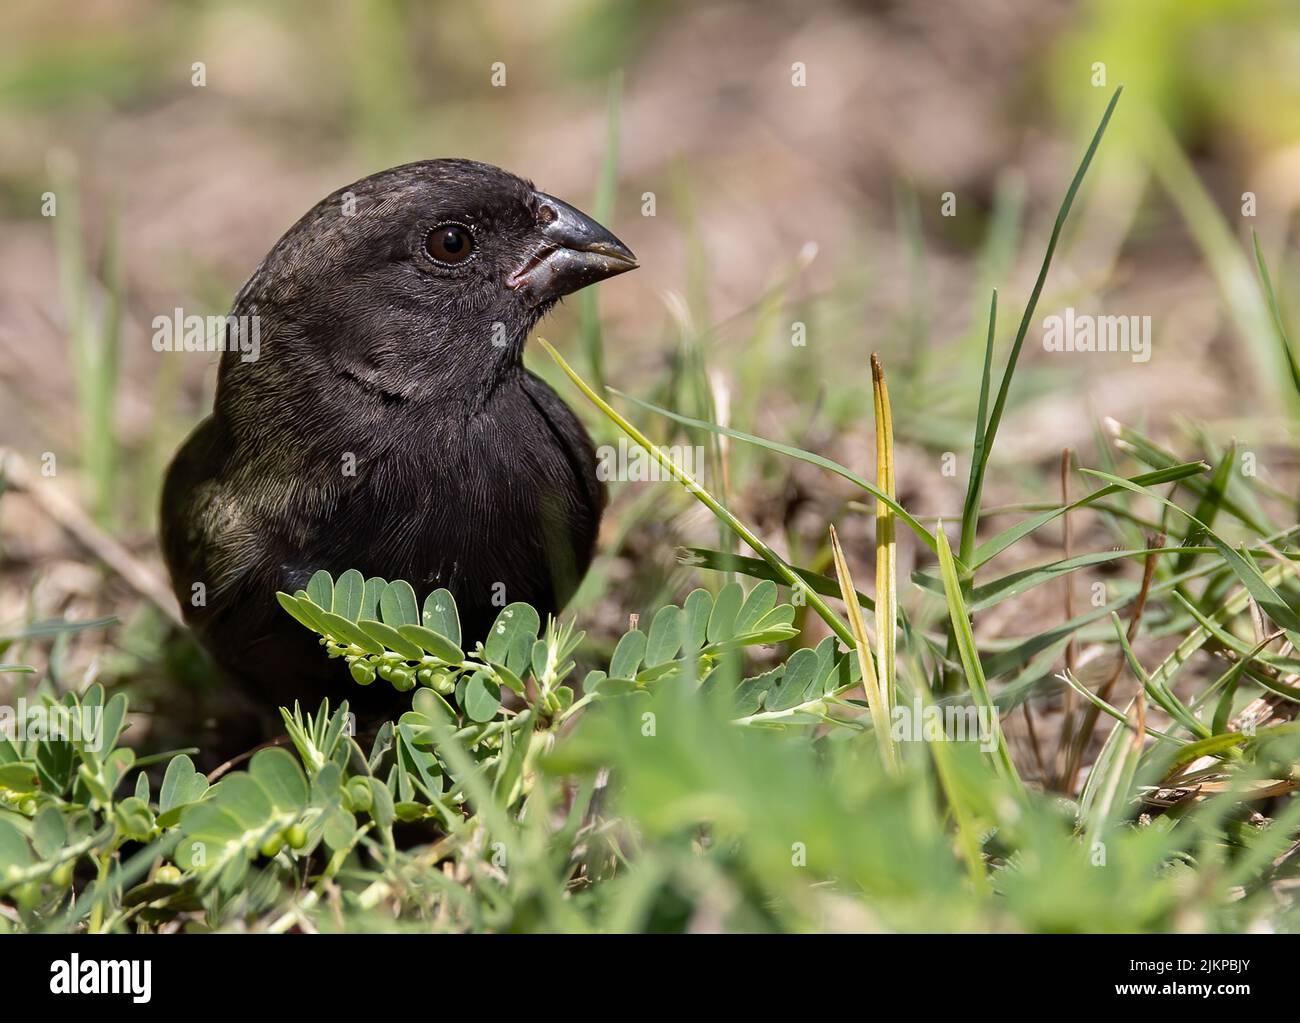 A closeup shot of a blackbird screeching sitting on green grasses in daylight with blurred background Stock Photo